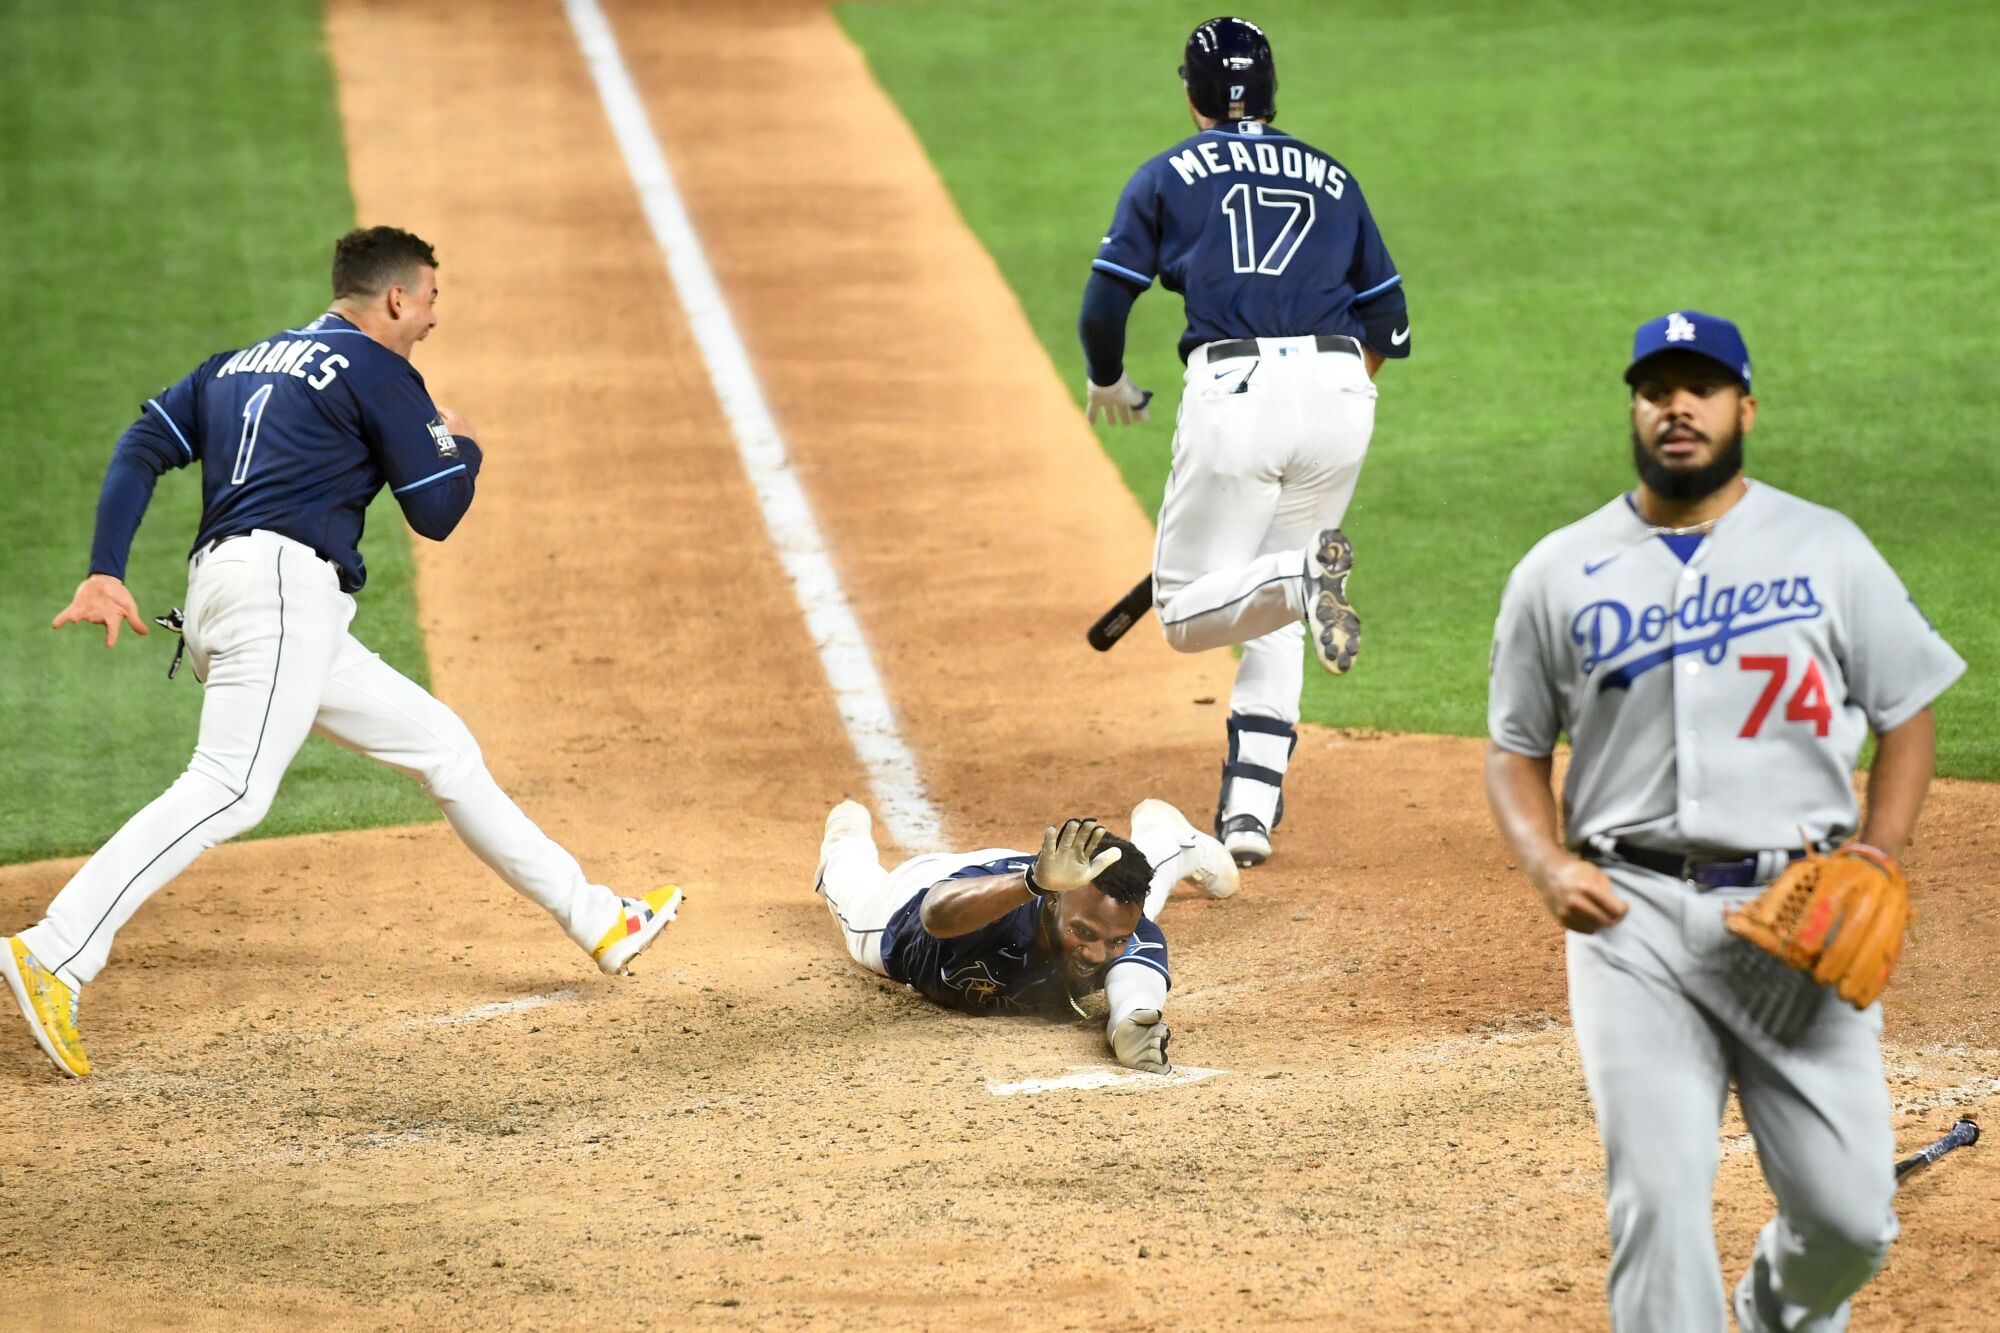 Tampa Bay's Randy Arozarena pounds home plate after sliding in to score the winning run.